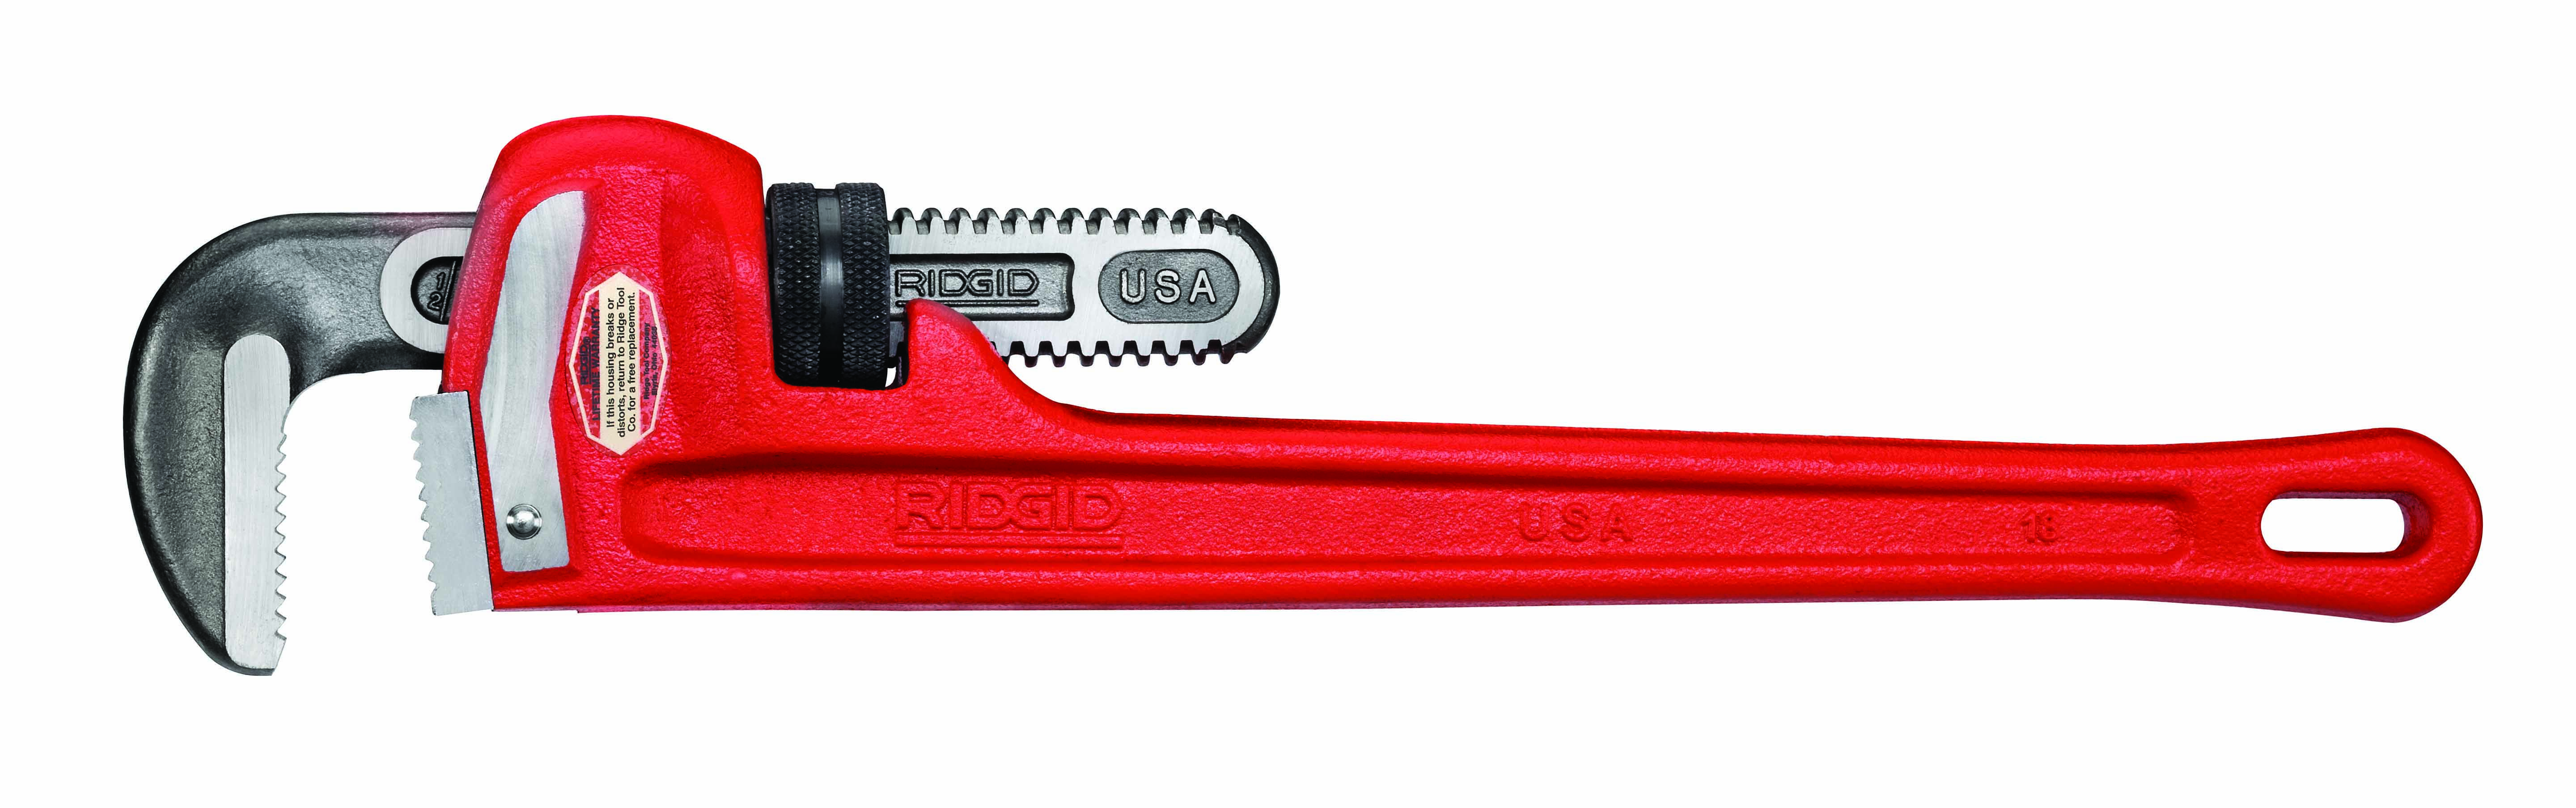 Ridgid 31025 Straight Pipe Wrench 18 inch Ductile-iron Model 18 USA Little Use 